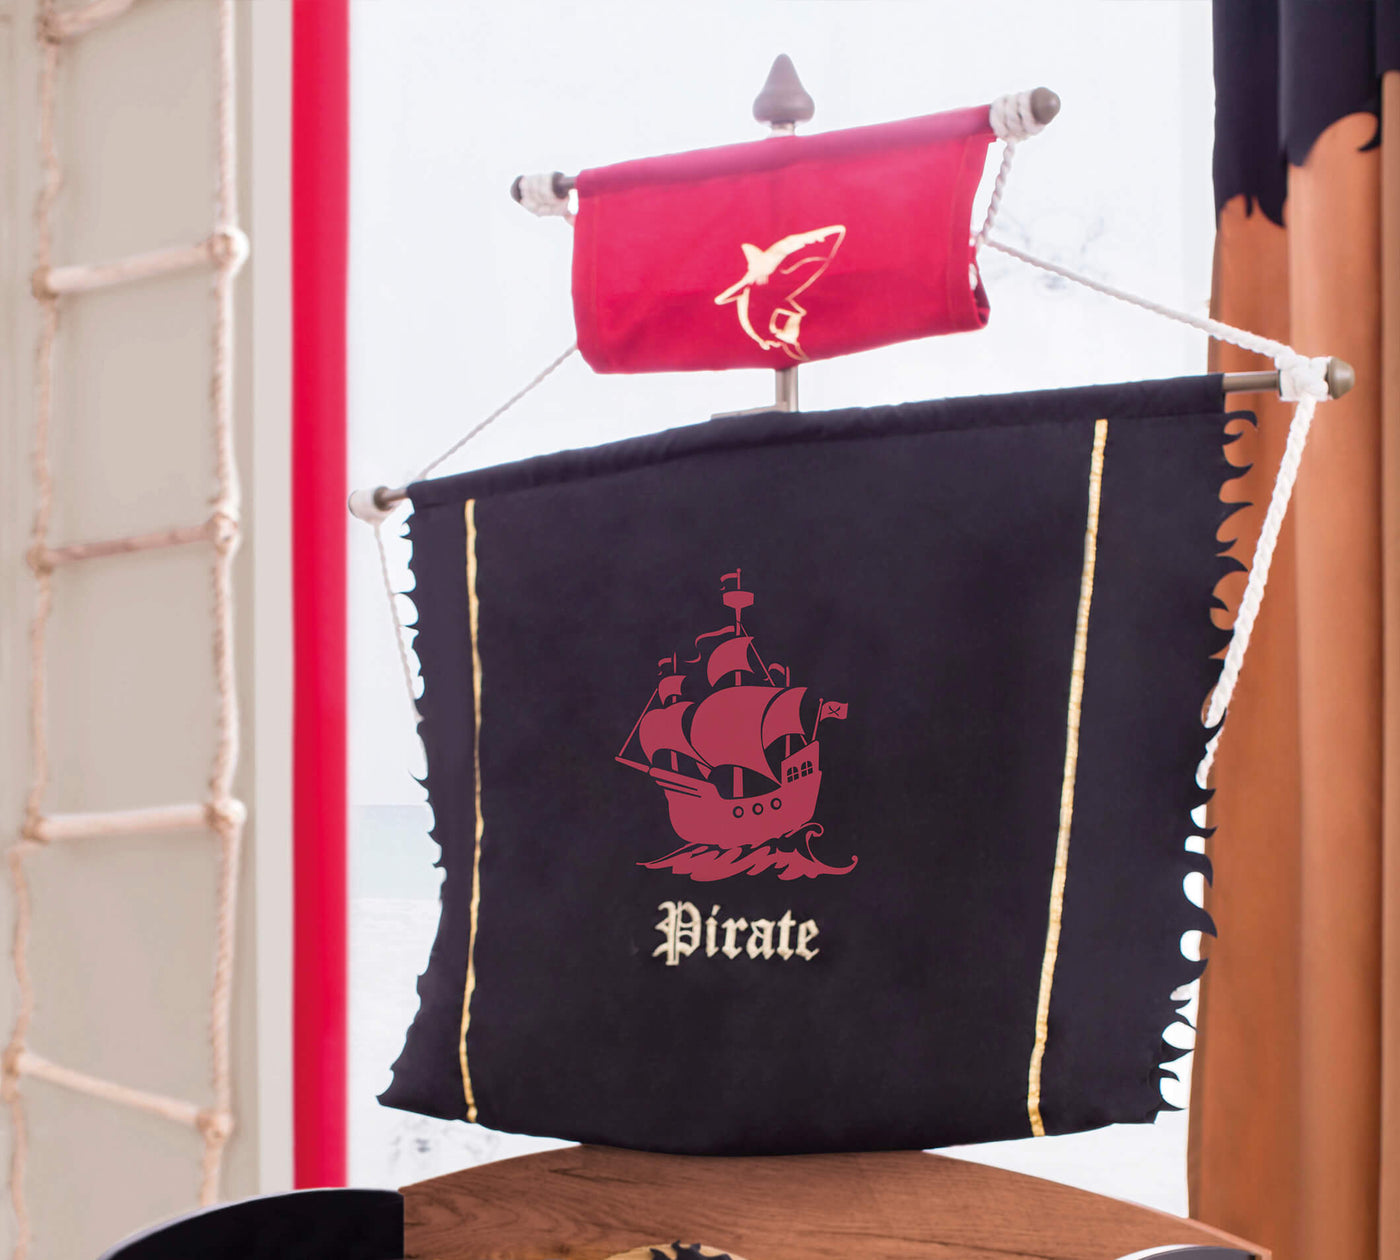 Pirate Ship Bed (90x190 cm)